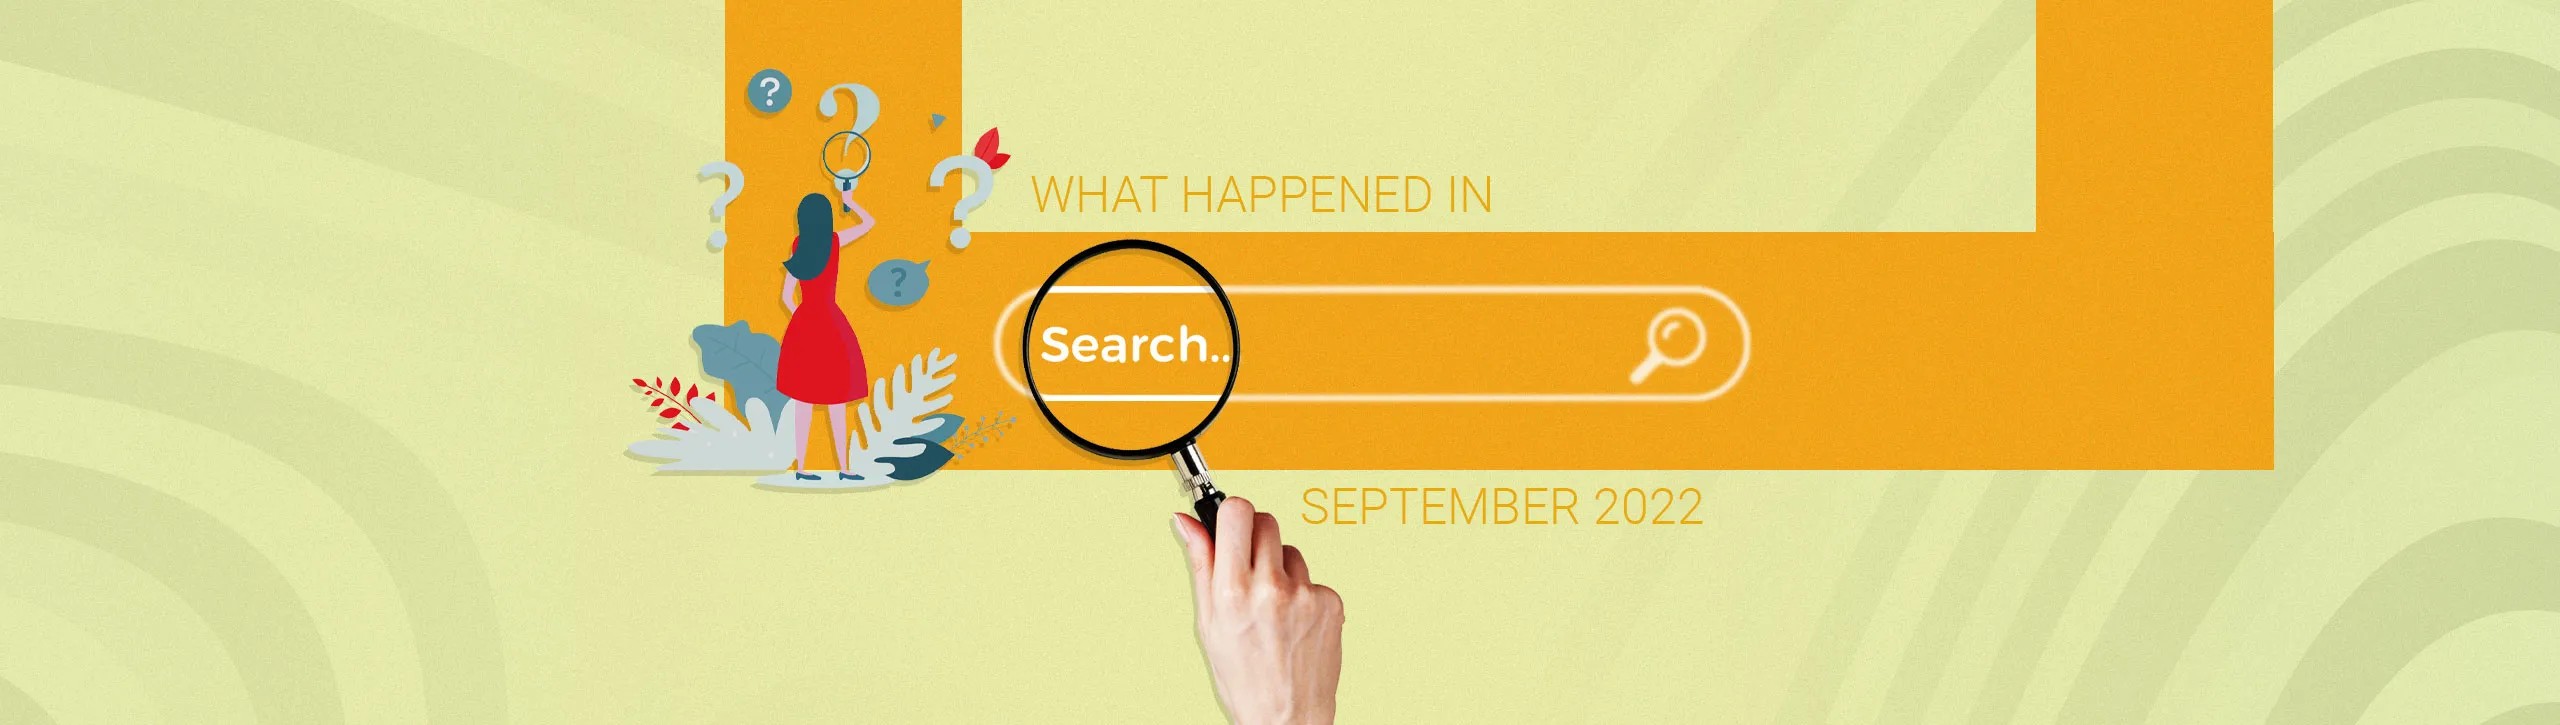 What happened in search september 2022